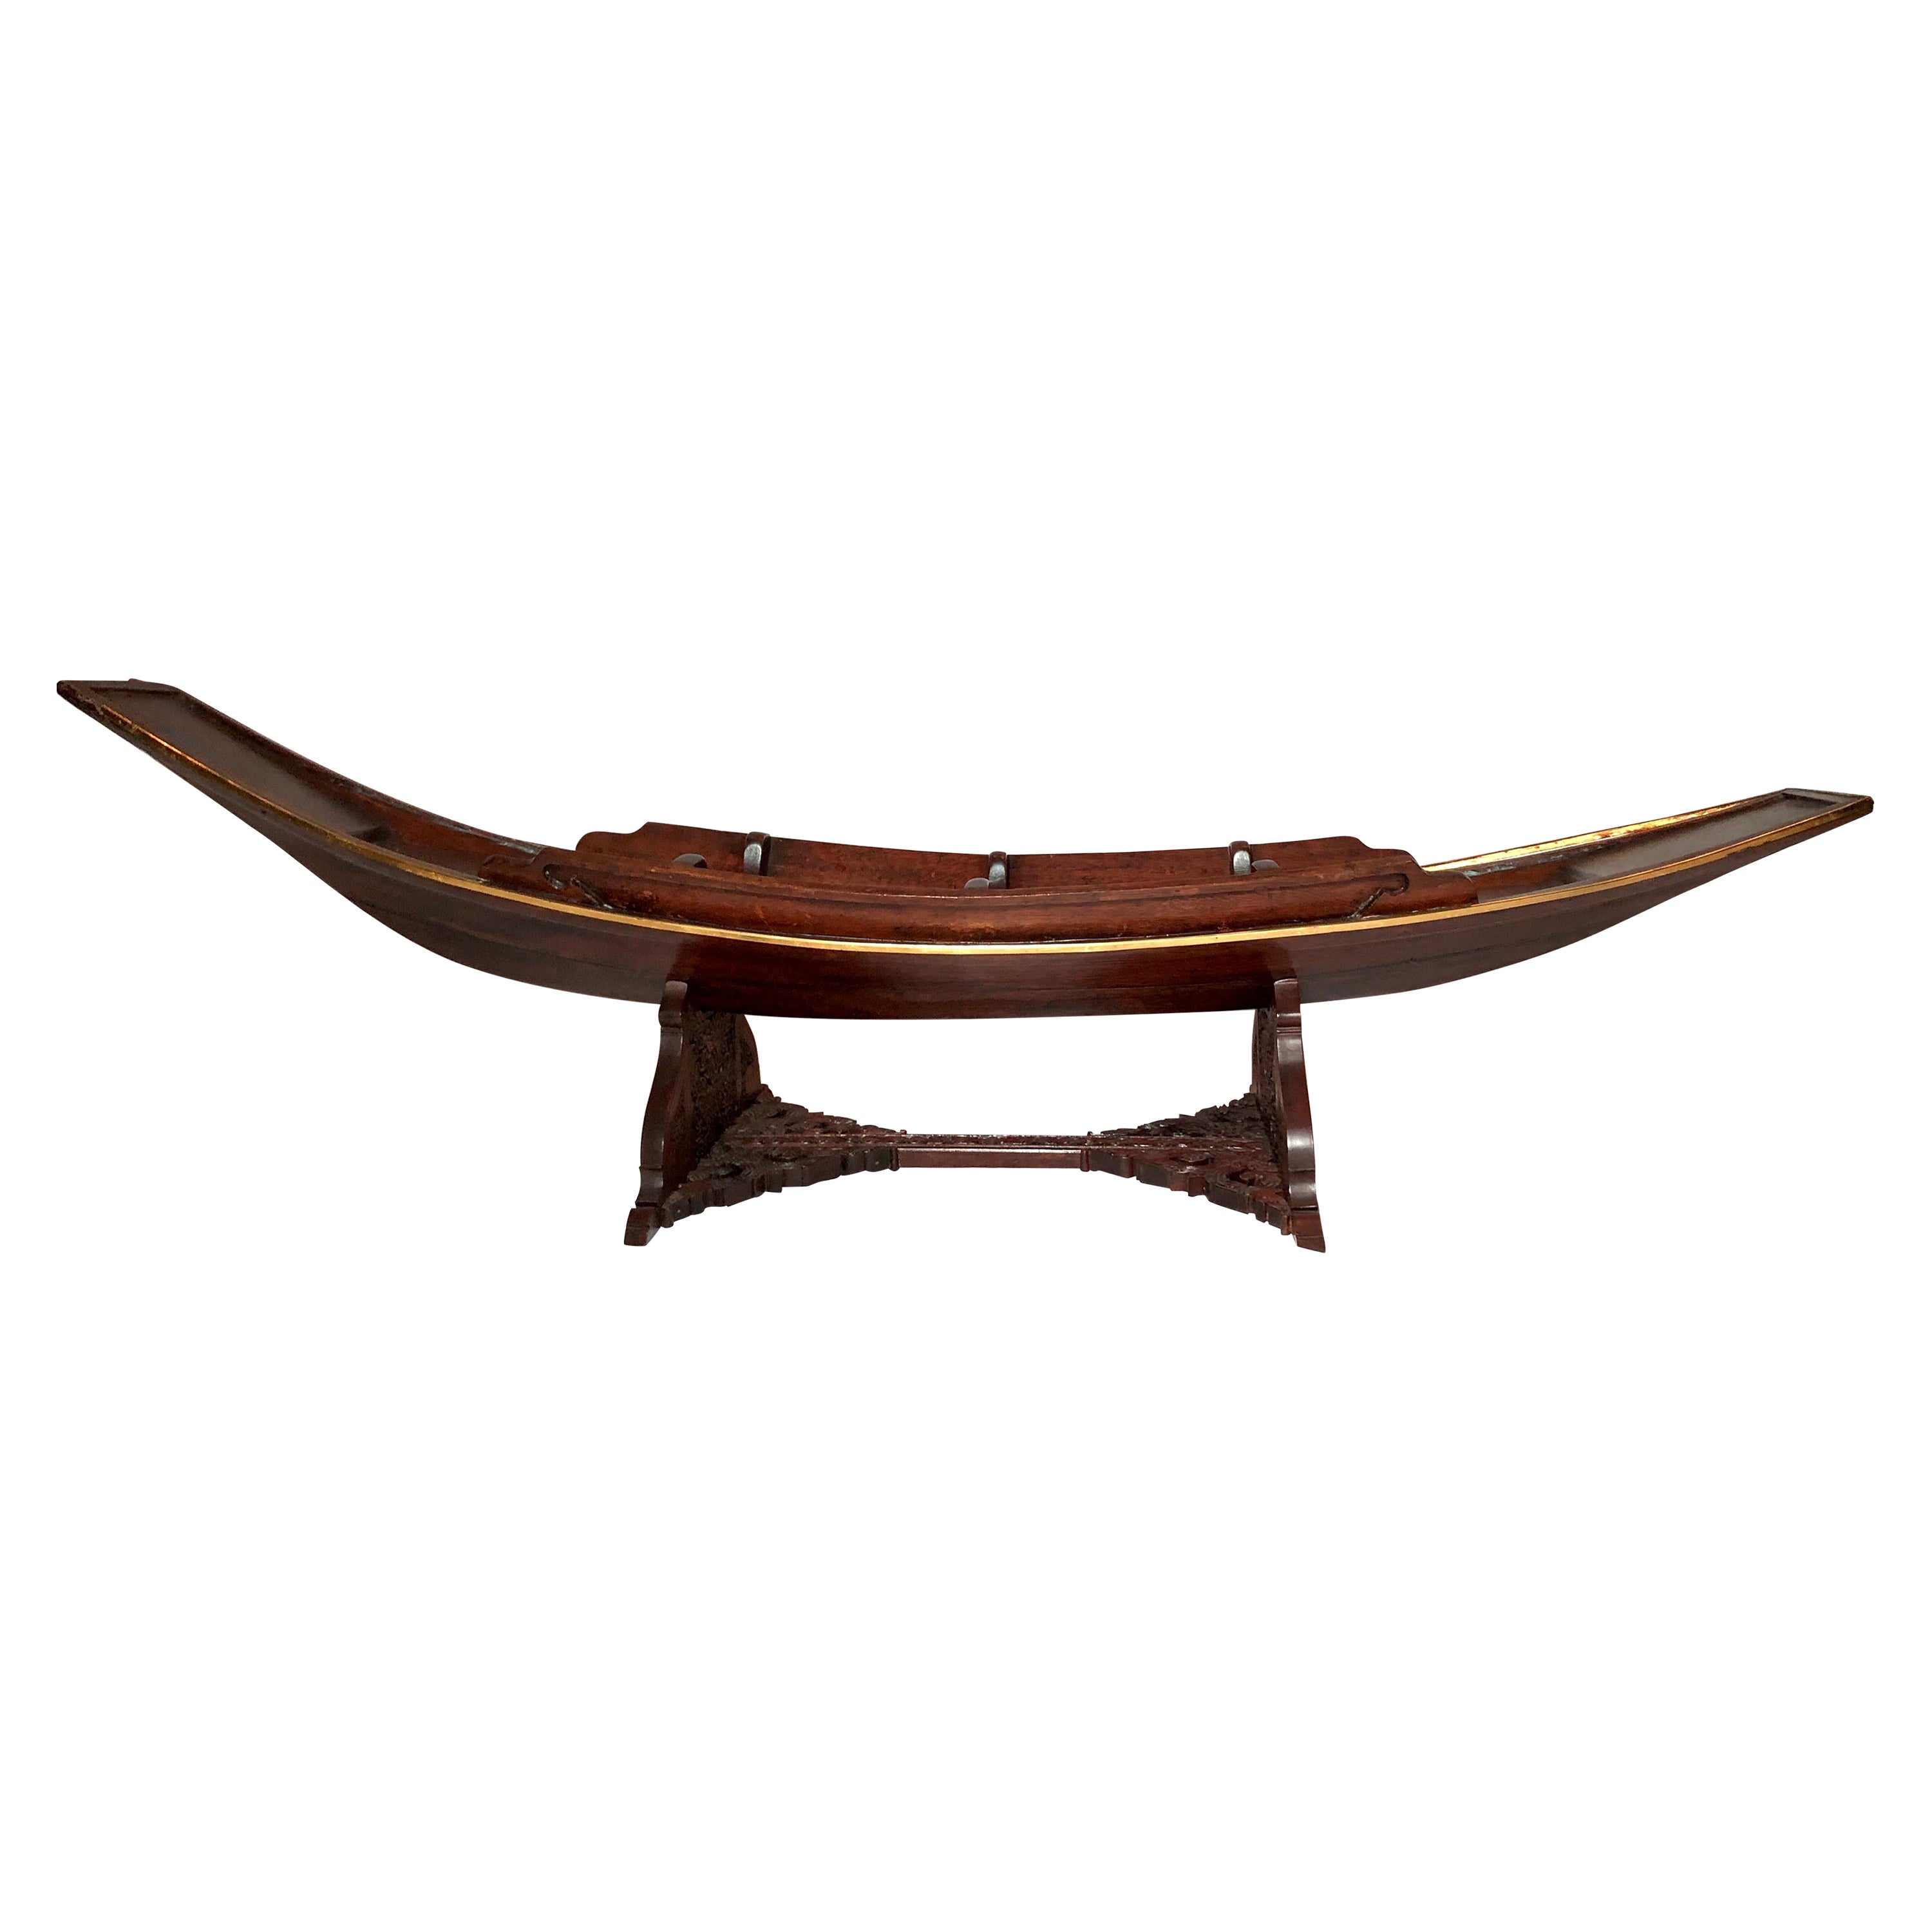 Antique Chinese Carved Teak Sailing Boat Centerpiece, circa 1900 For Sale